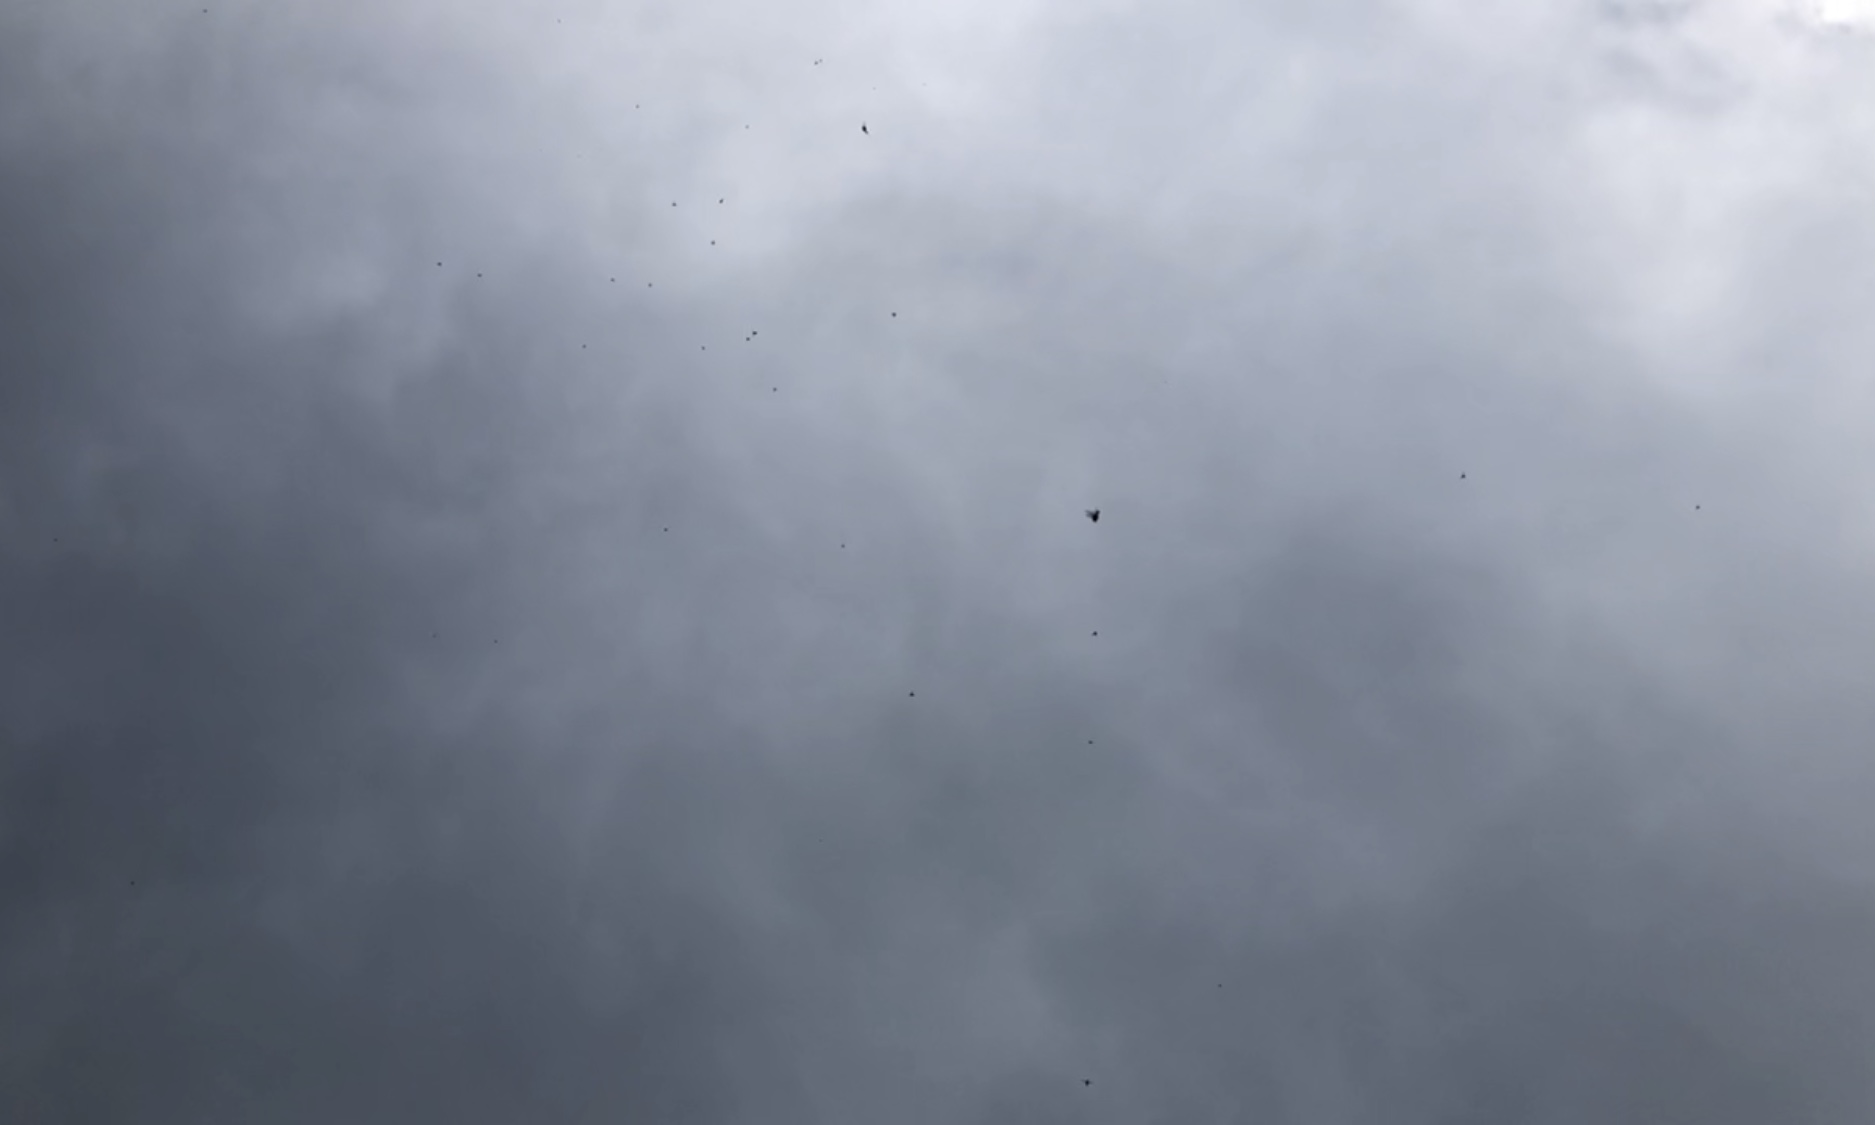 The swarm of flies, now somewhat more to the right of the photo, appearing as dozens of black dots of varying size, with the darker grey clouds overhead.